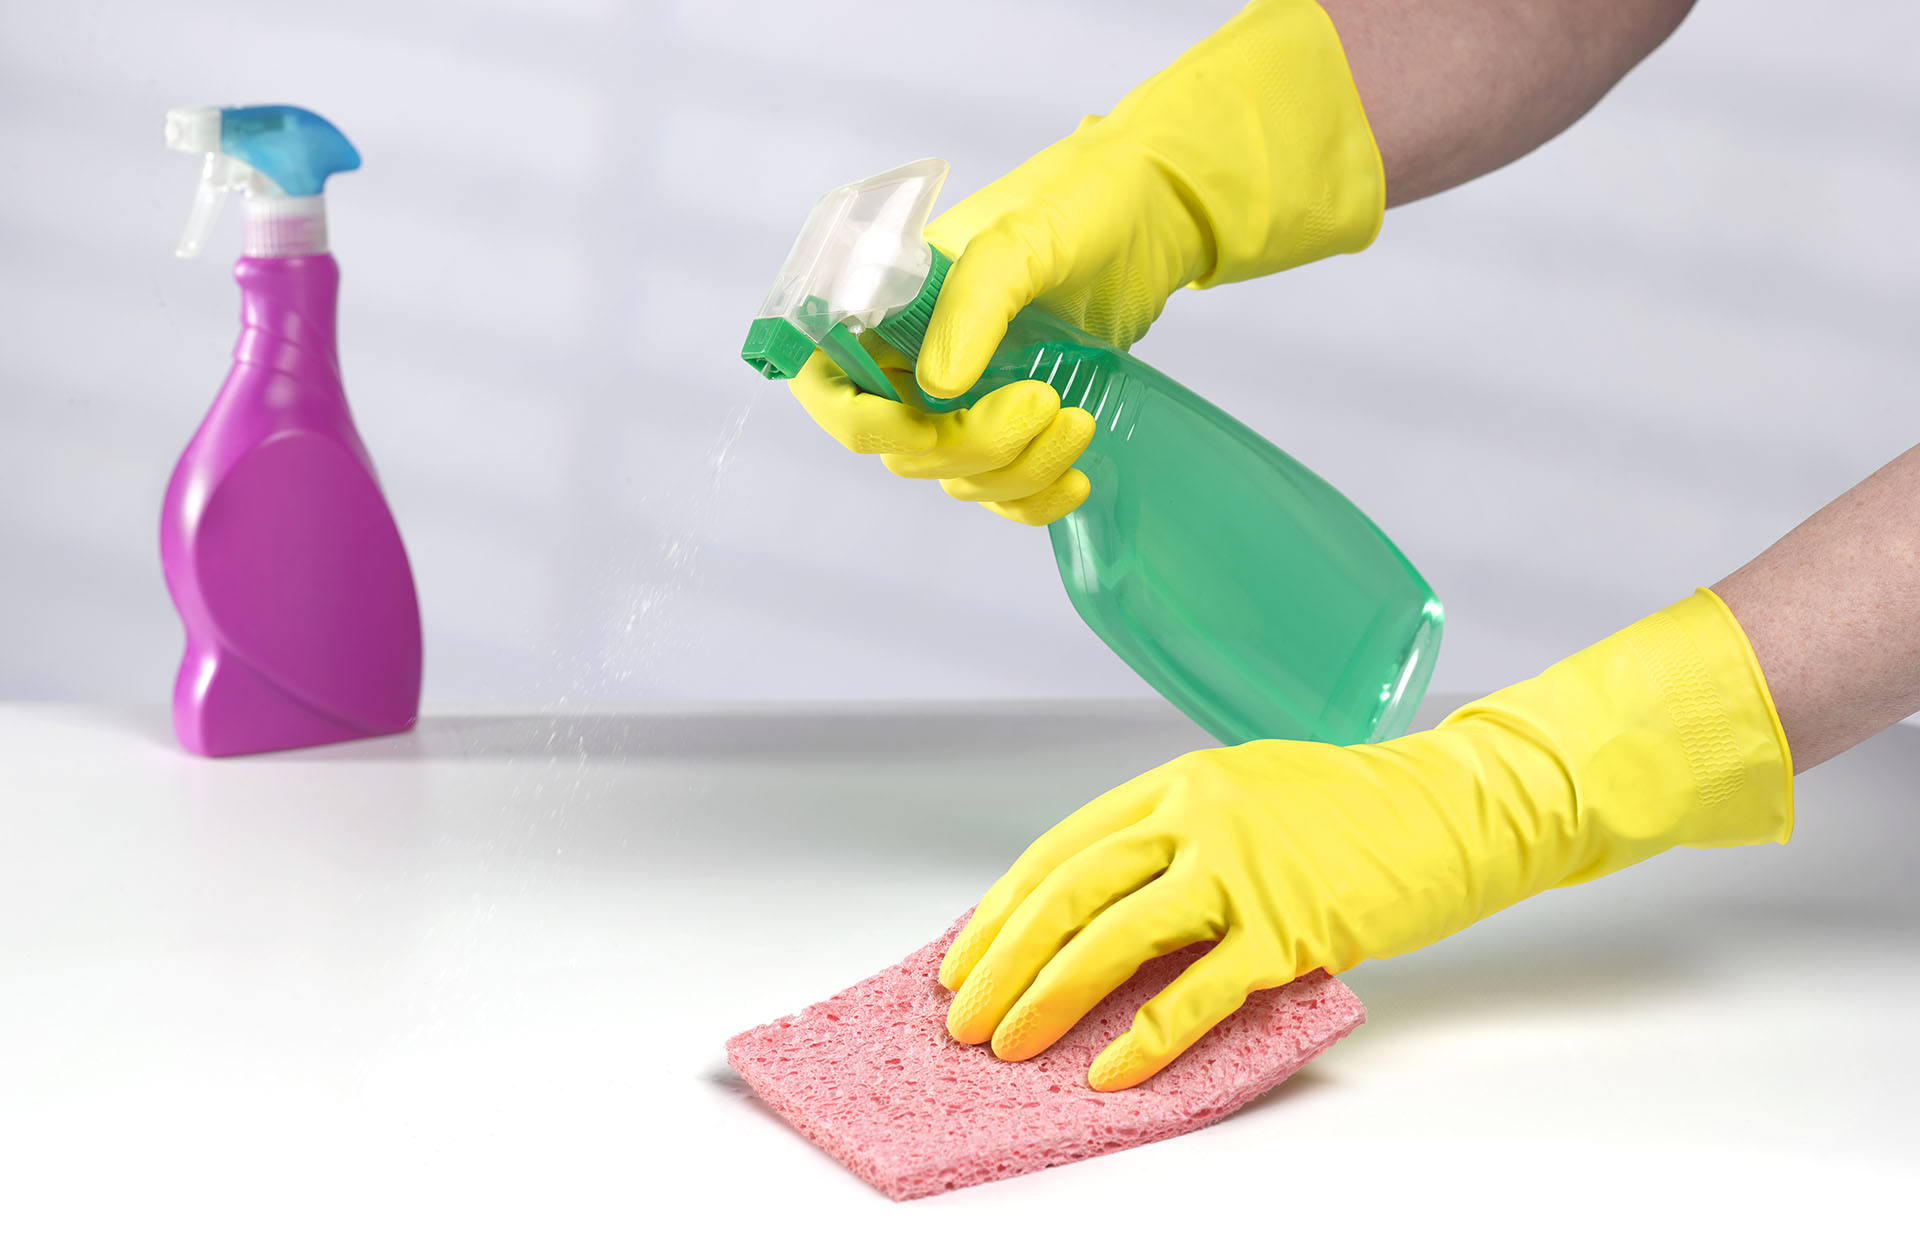 Cleaning surfaces helps avoid contagion